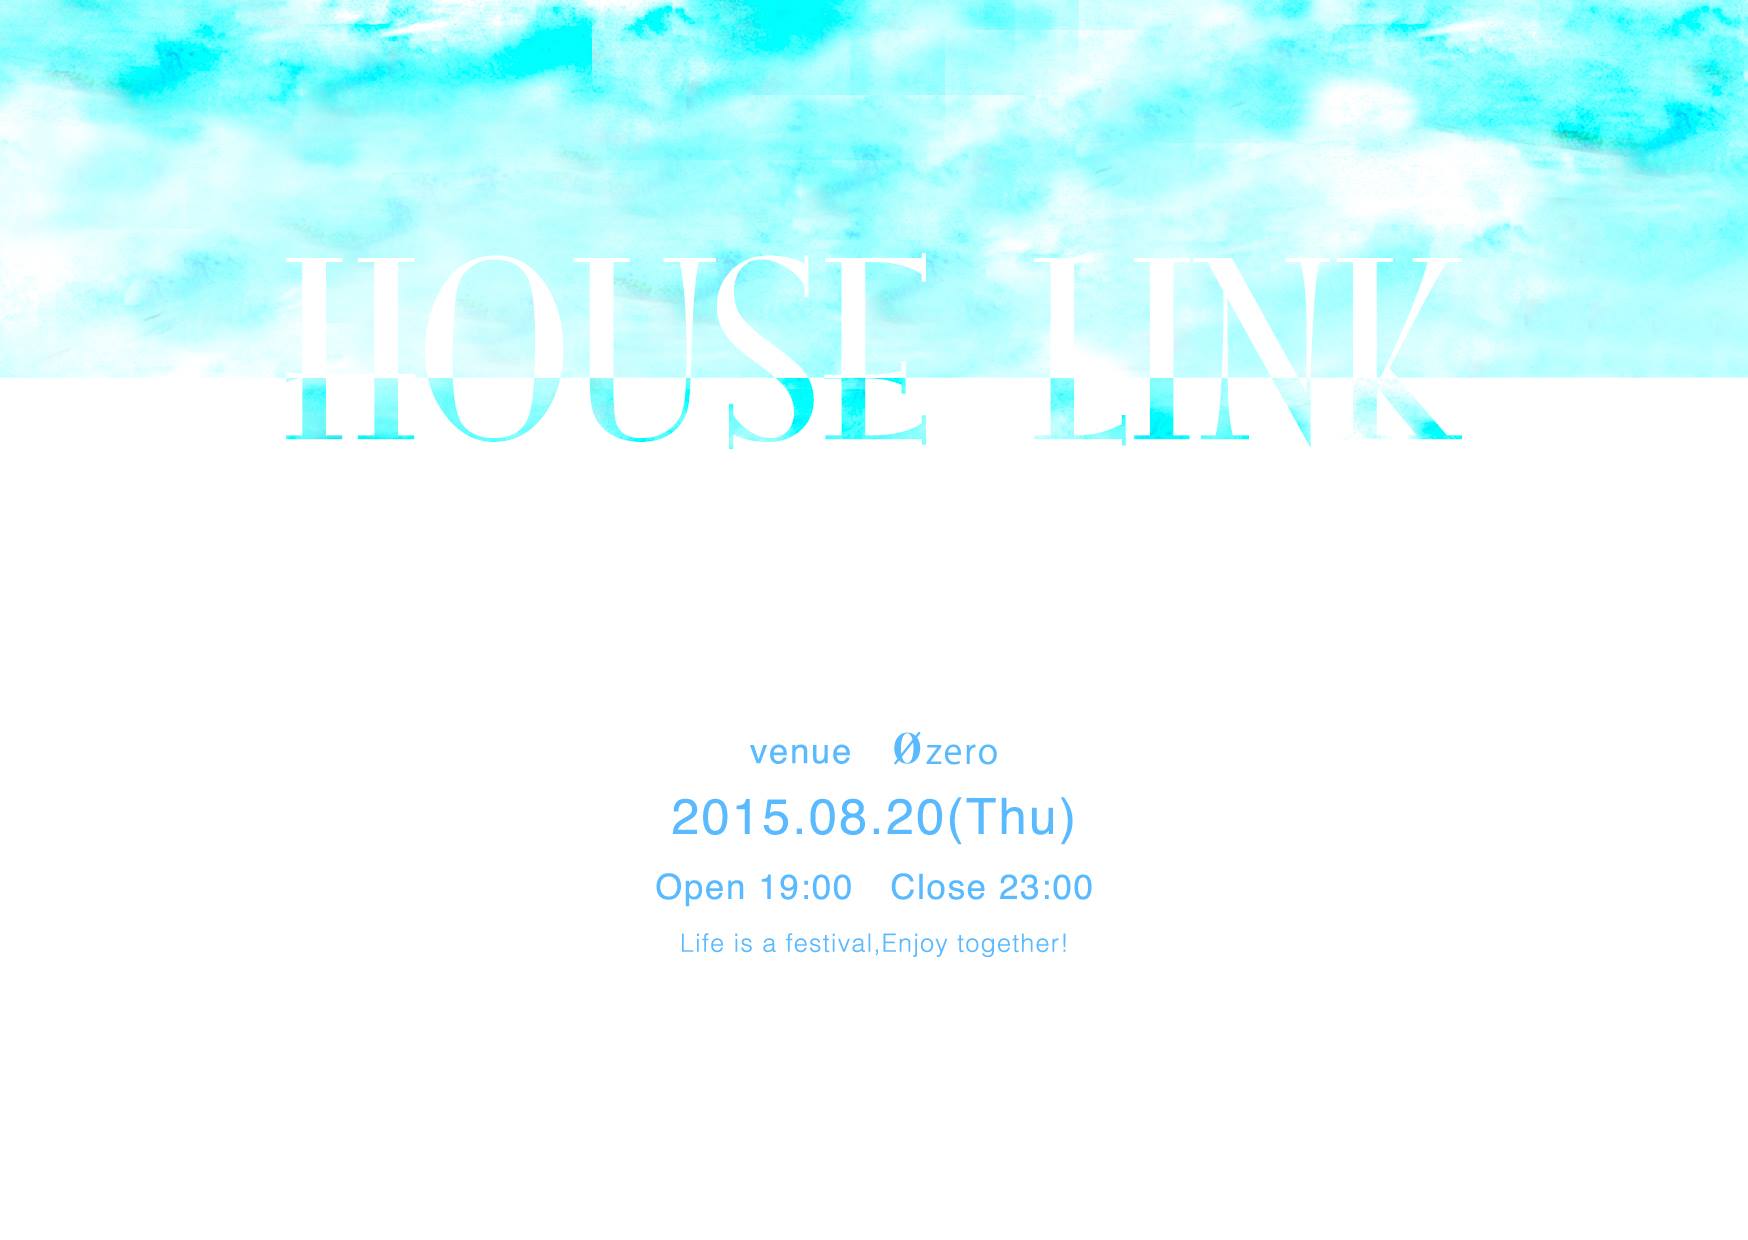 HOUSE LINK